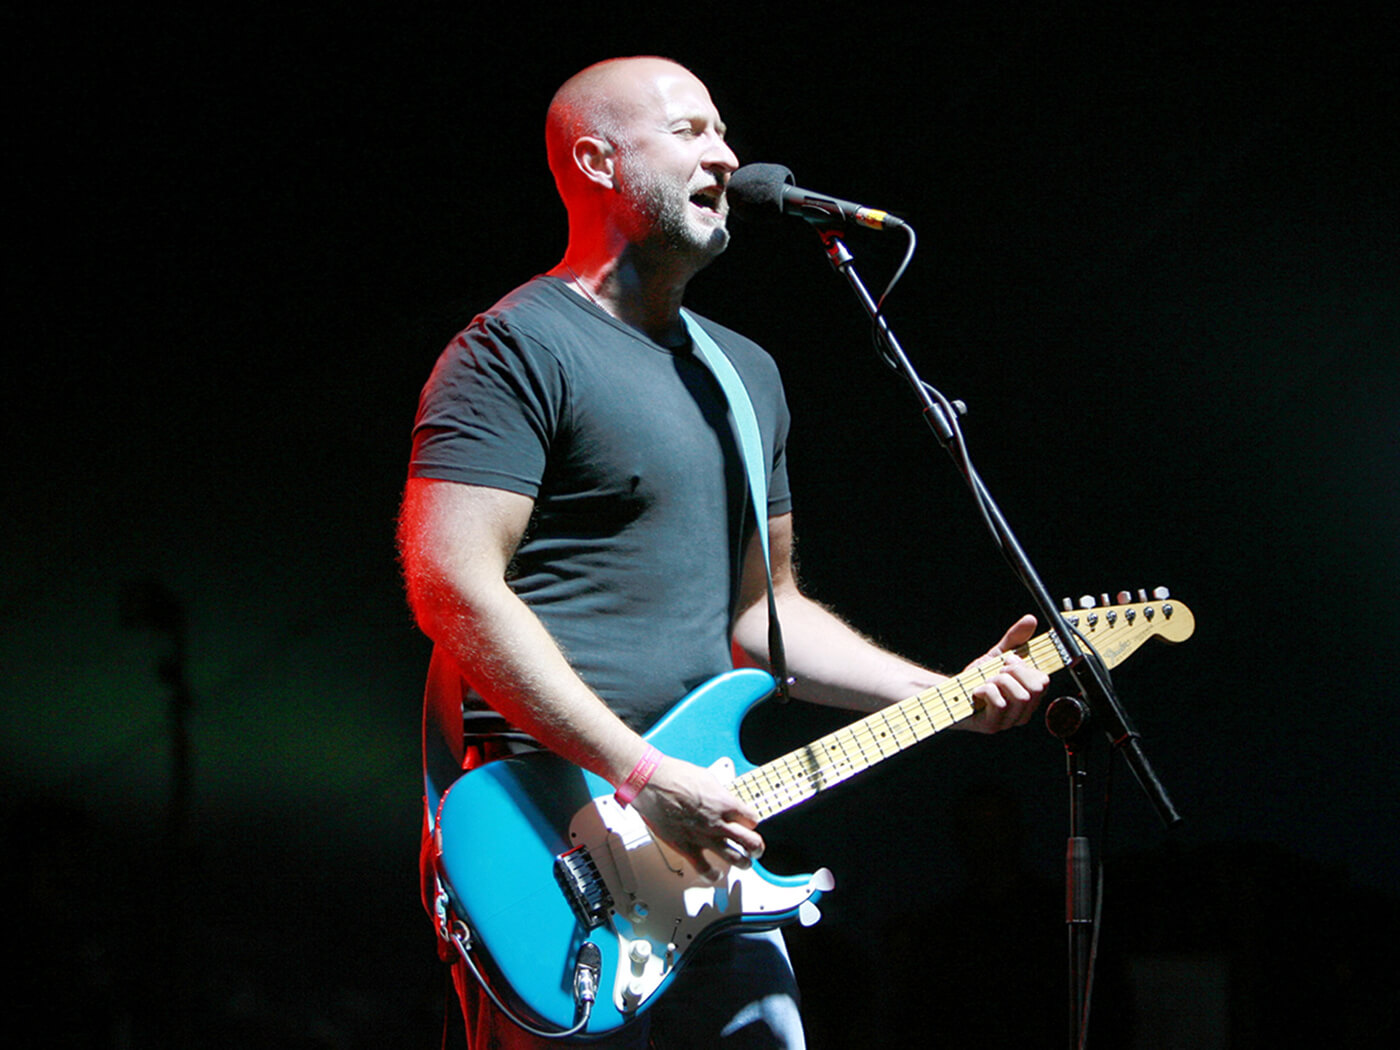 Bob Mould performing at Leeds in 2006, photo by Andy Paradise/WireImage via Getty Images